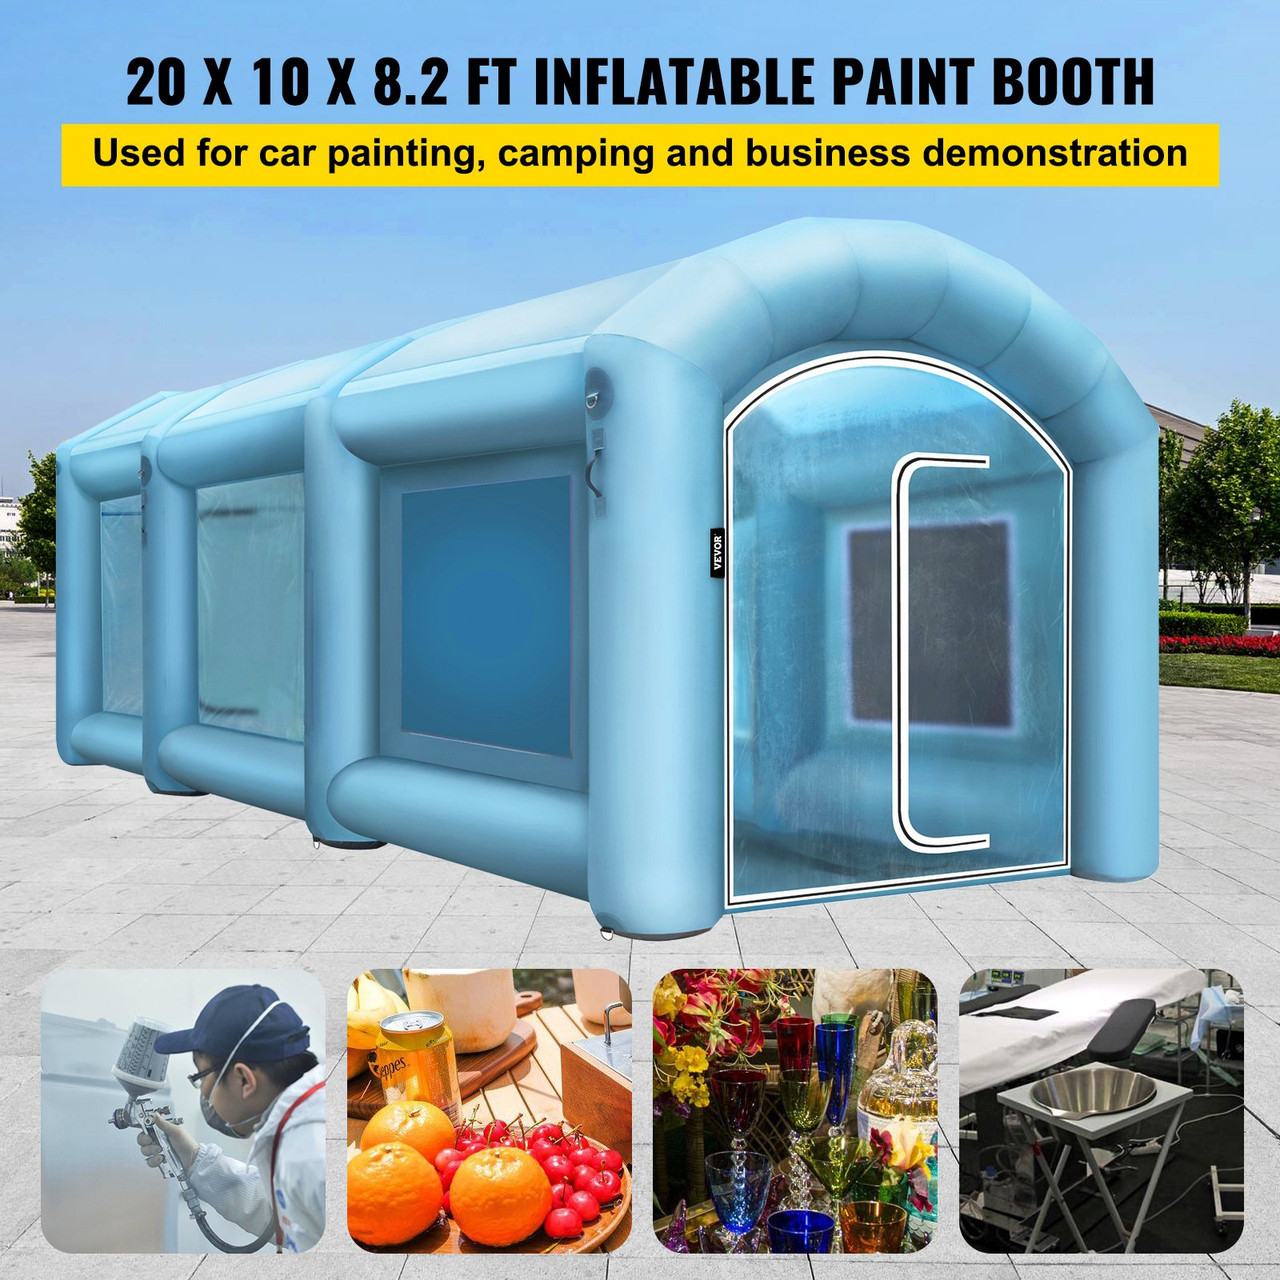 Best Deal for Inflatable Spray Booth with Filter System Portable Car